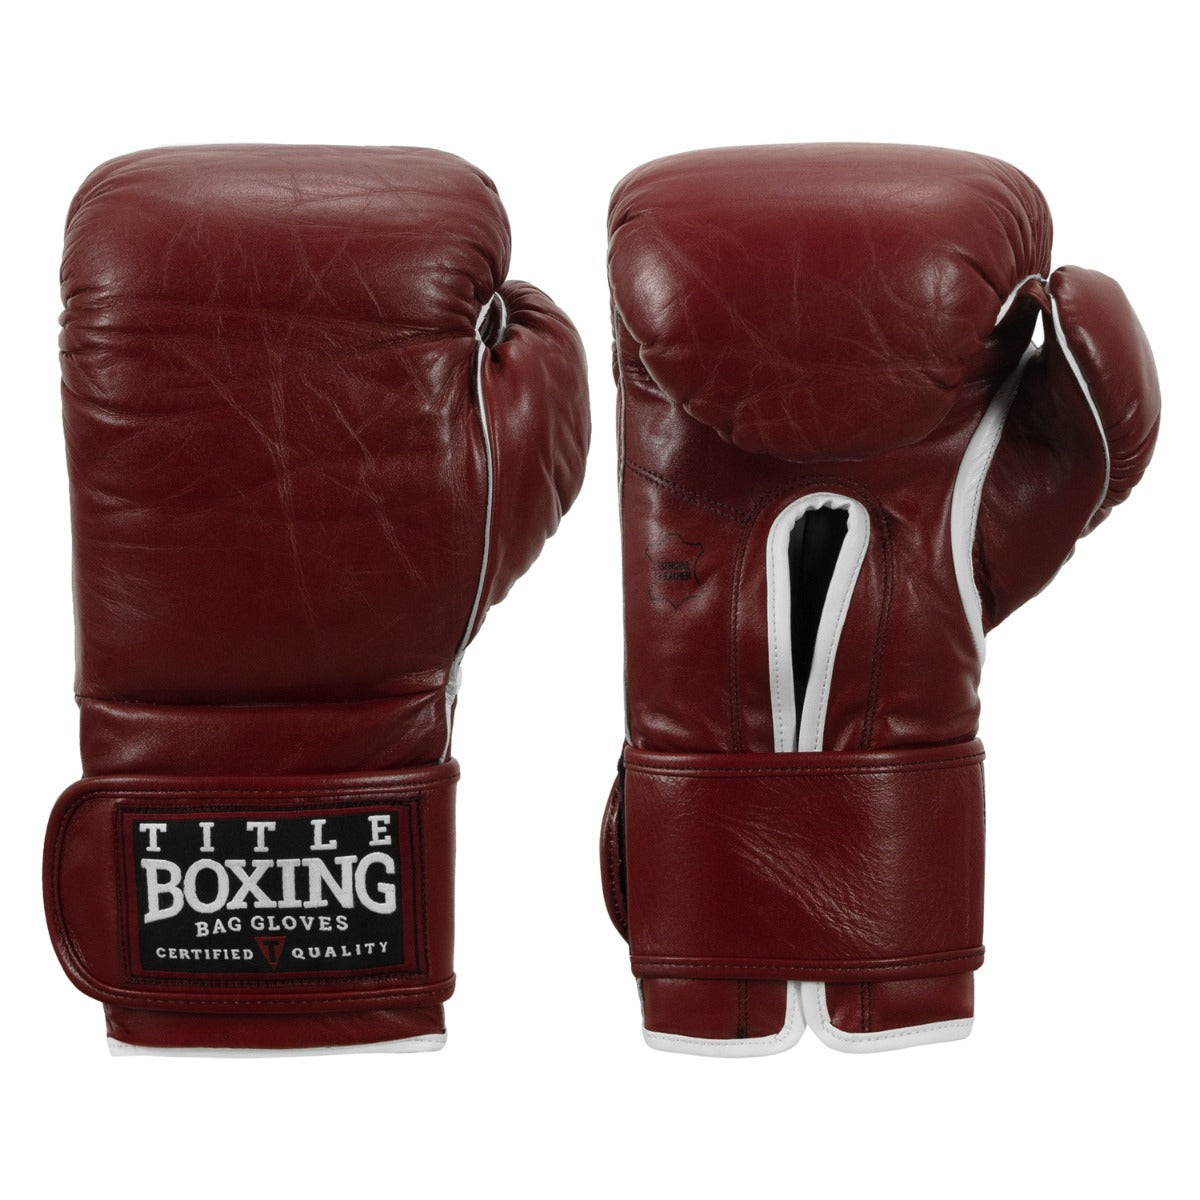 TITLE Old School Leather Bag Gloves | TITLE Boxing Gear